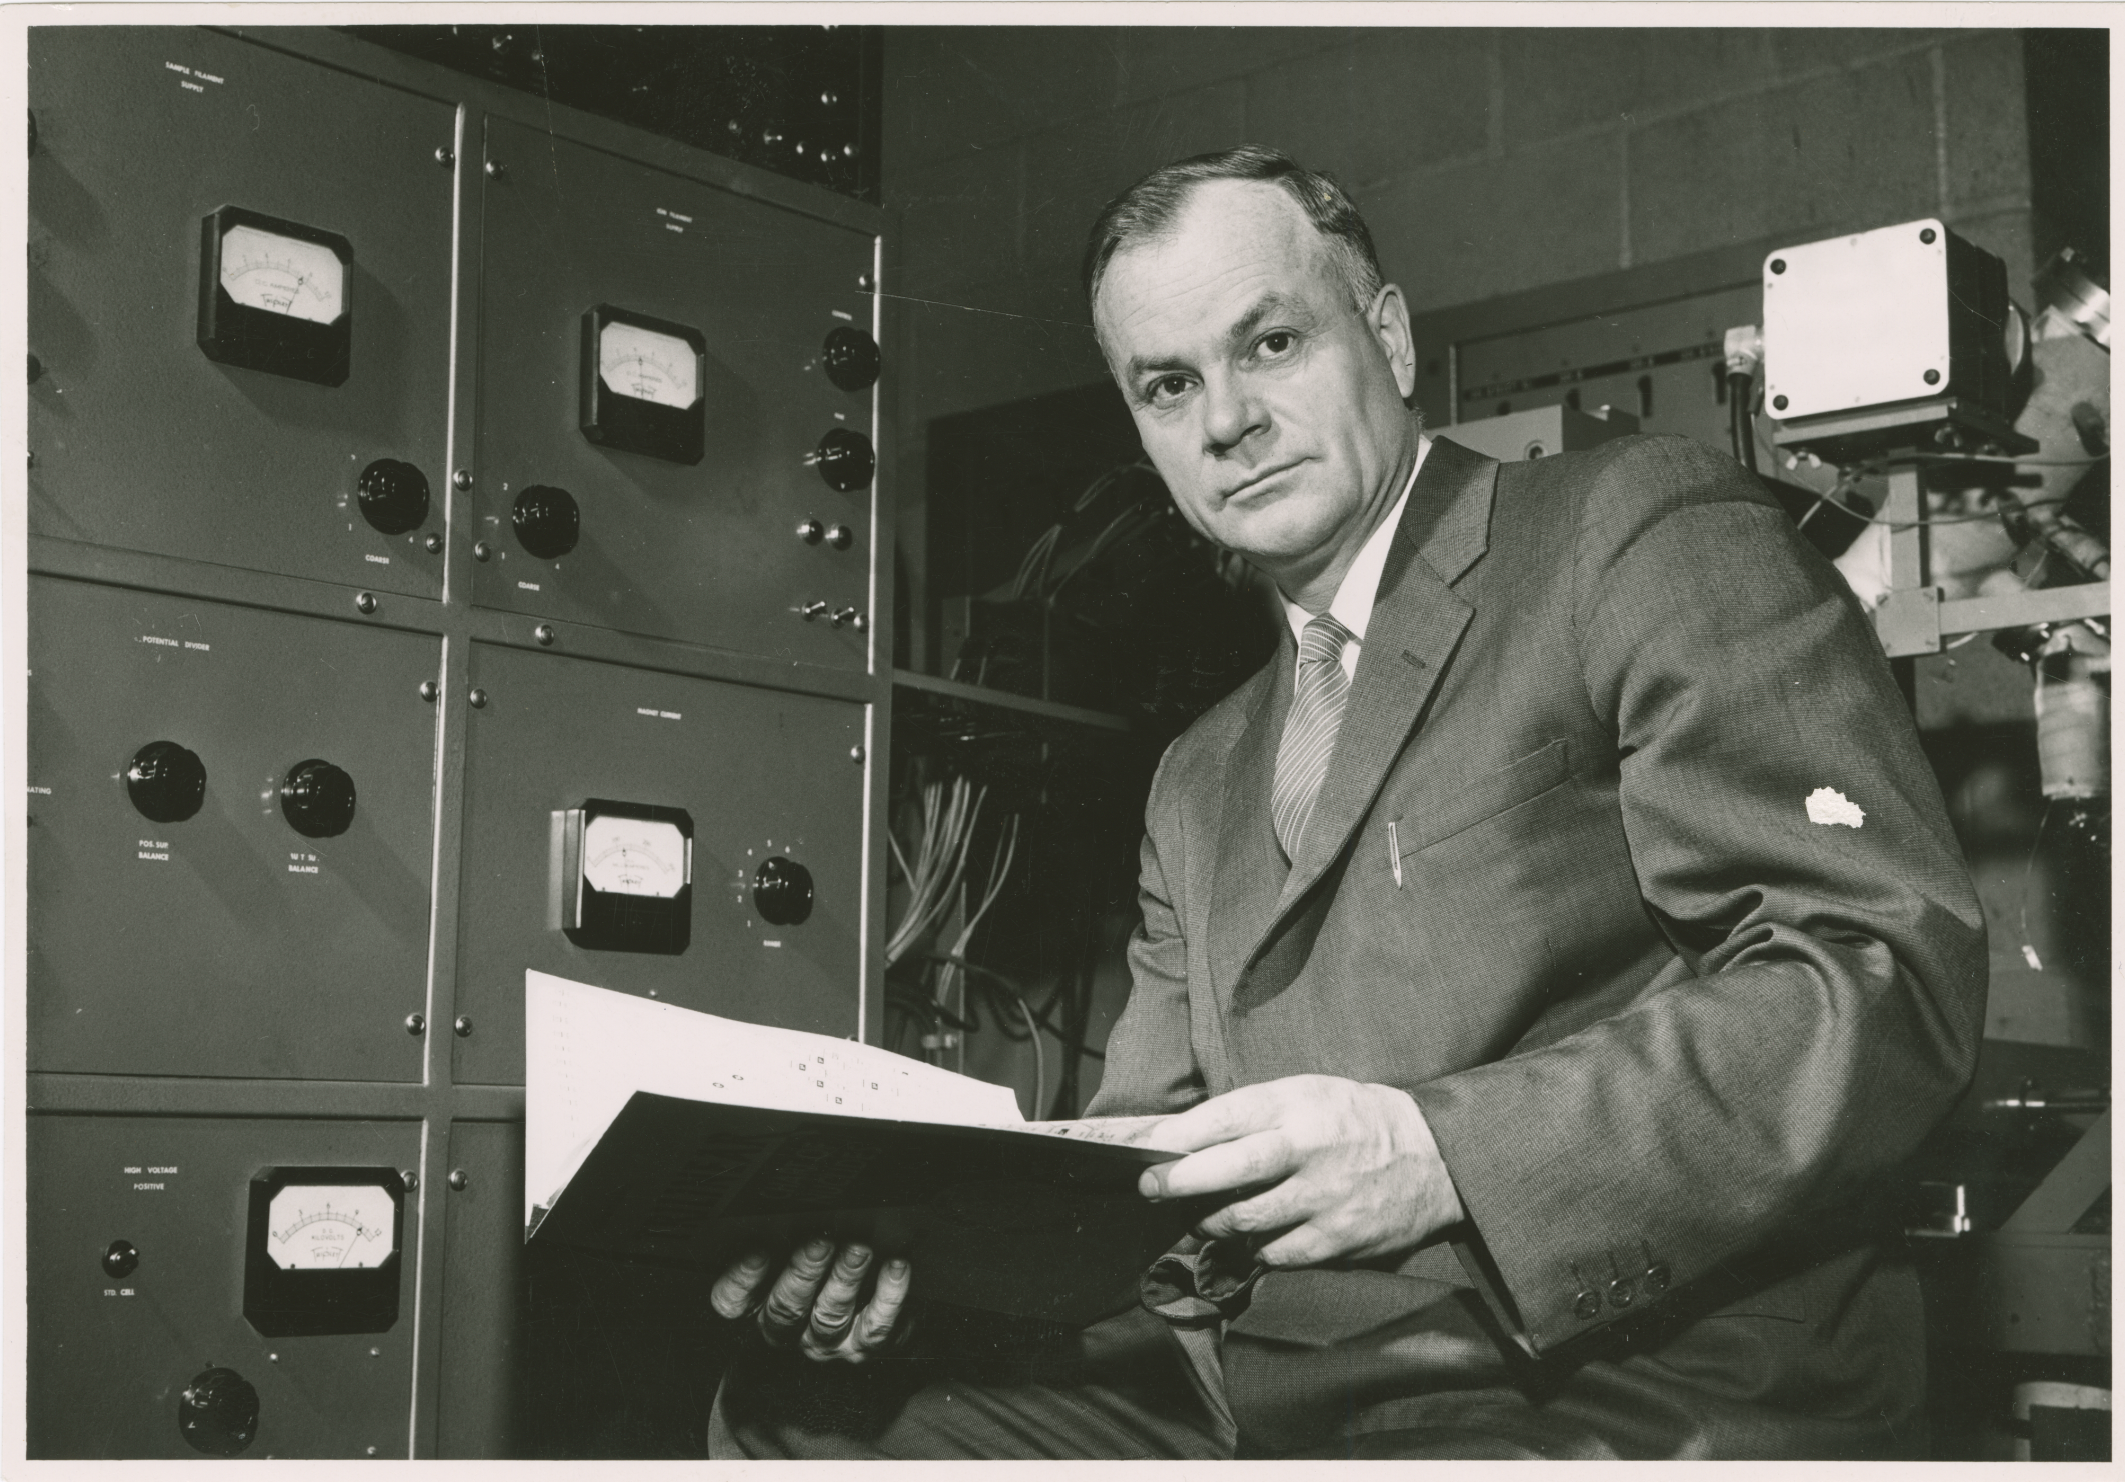 Harry Thode holding a book and sitting in the control room of McMaster Nuclear Reactor